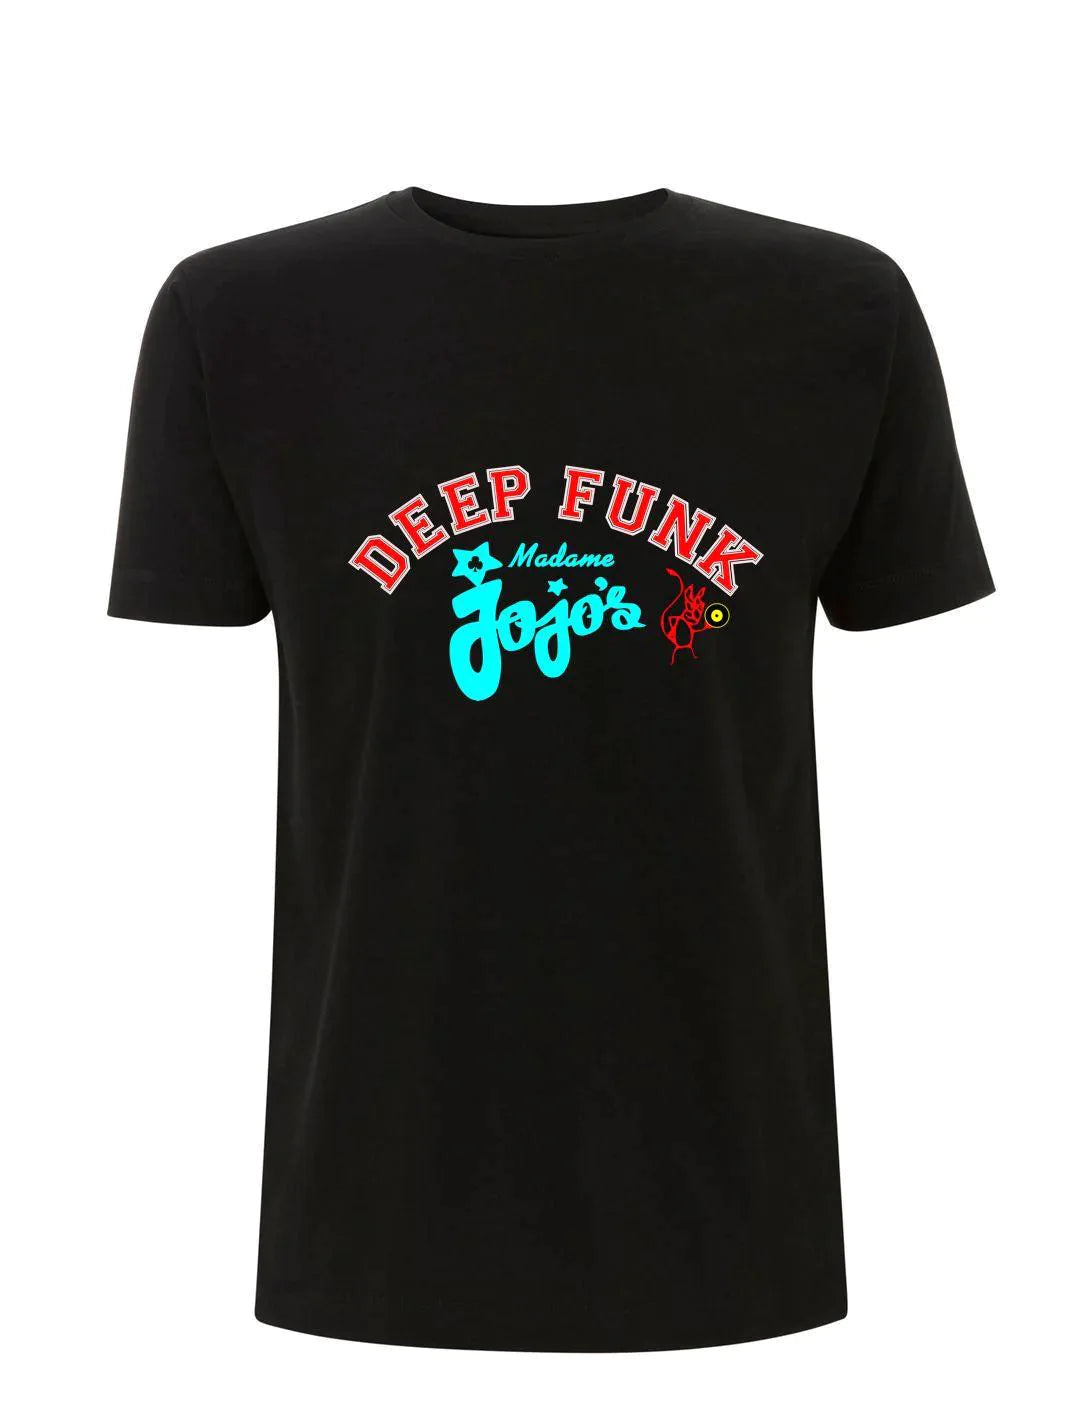 DEEP FUNK at JoJo's (Many Colours): Official Keb Darge T-Shirt. - SOUND IS COLOUR